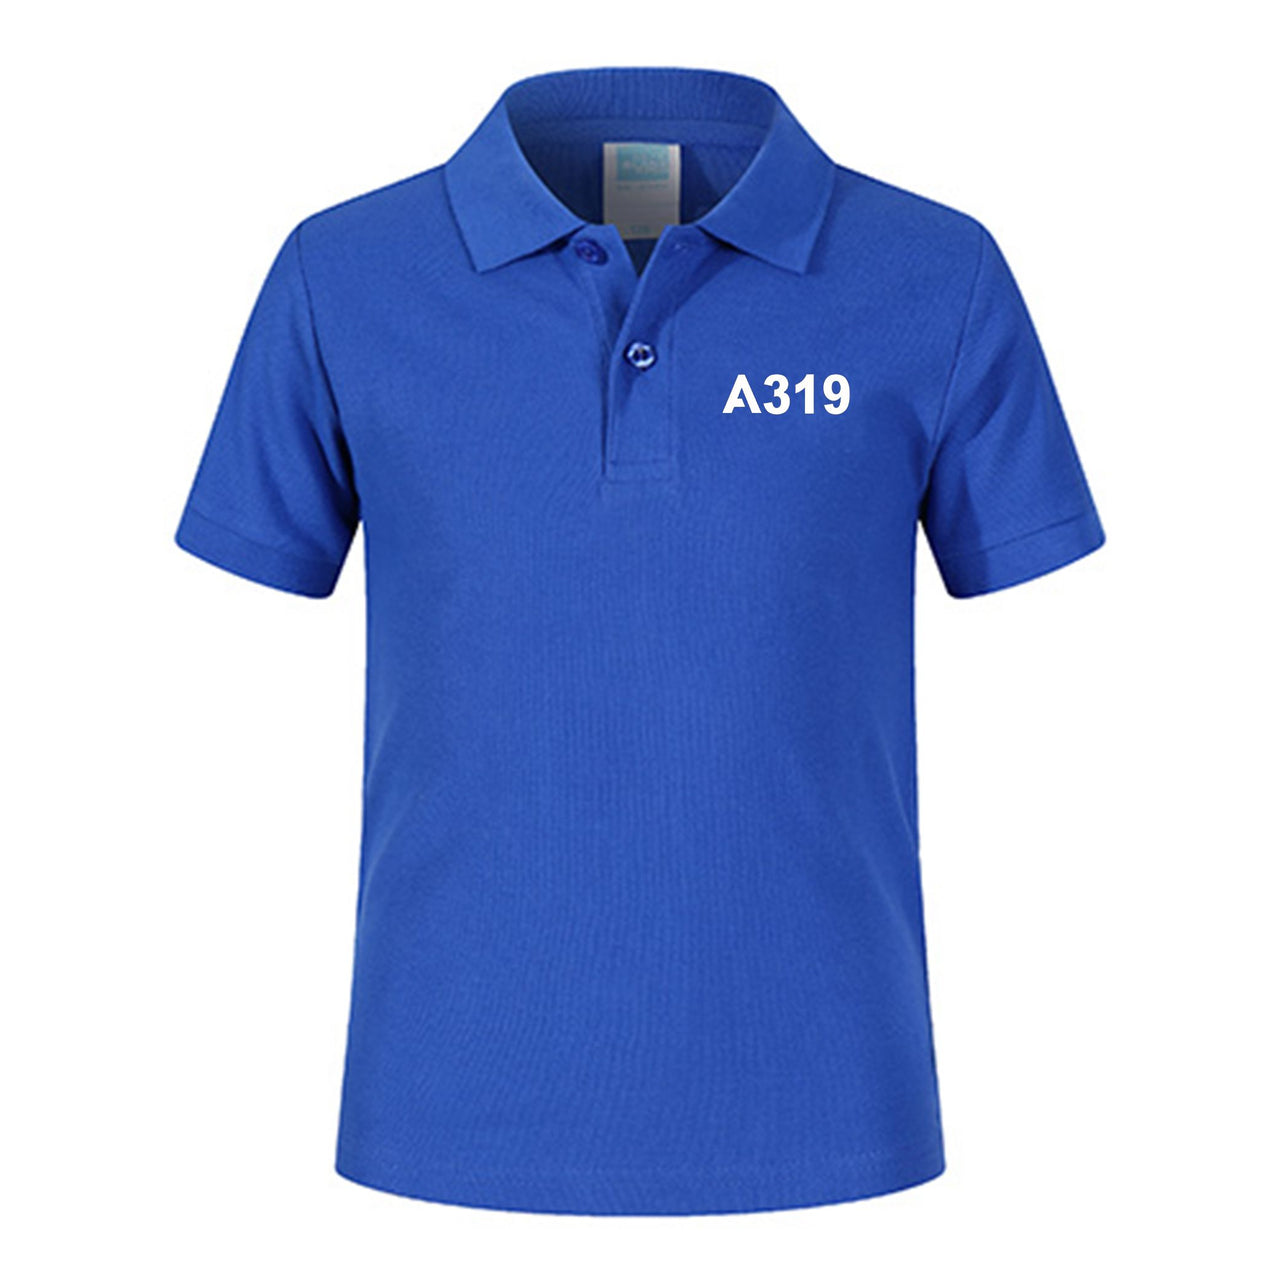 A319 Flat Text Designed Children Polo T-Shirts